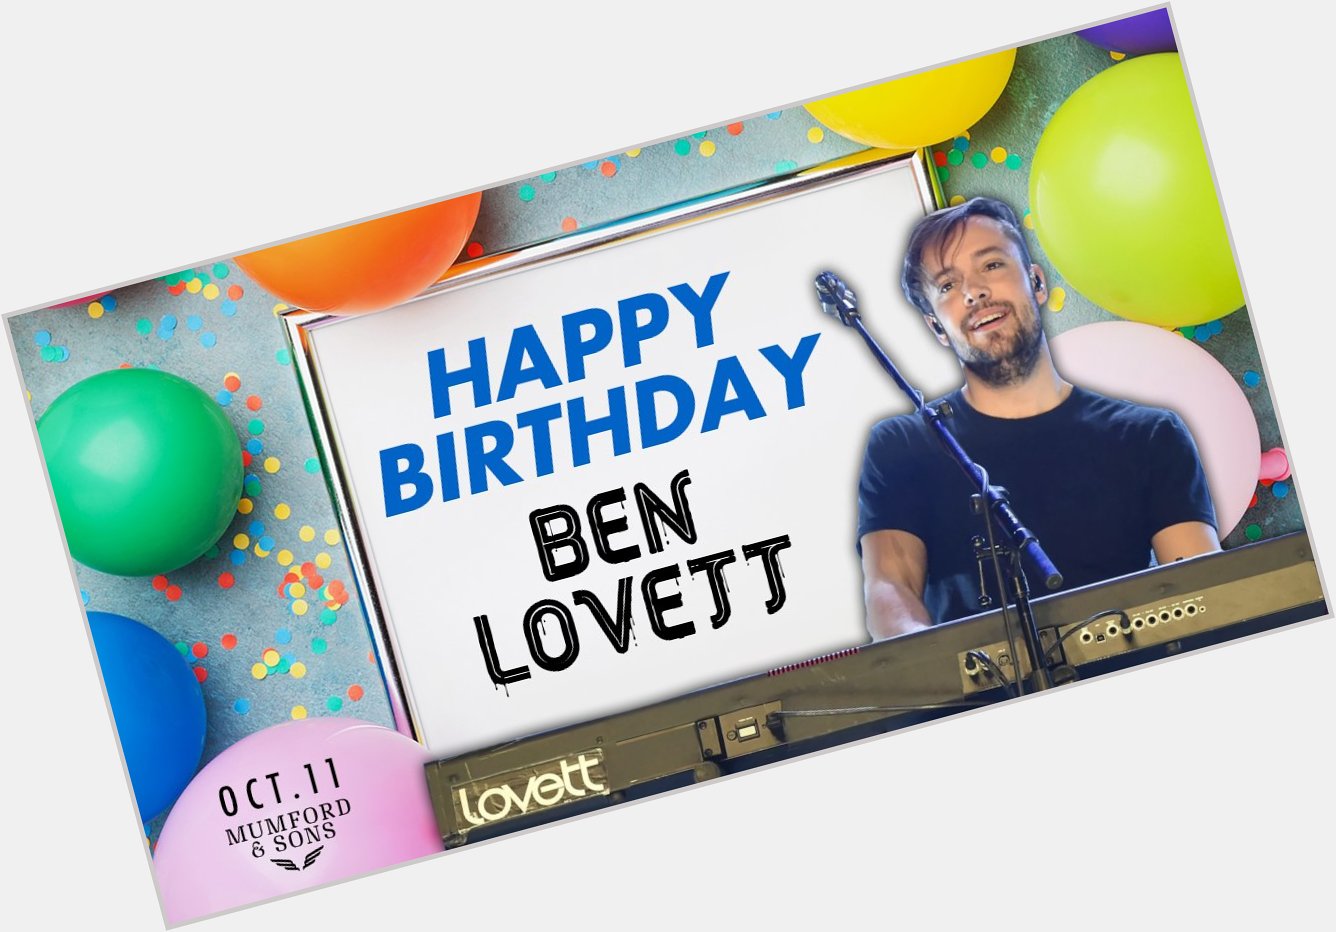 A very happy birthday to Ben Lovett! See you in OKC on October 11! 